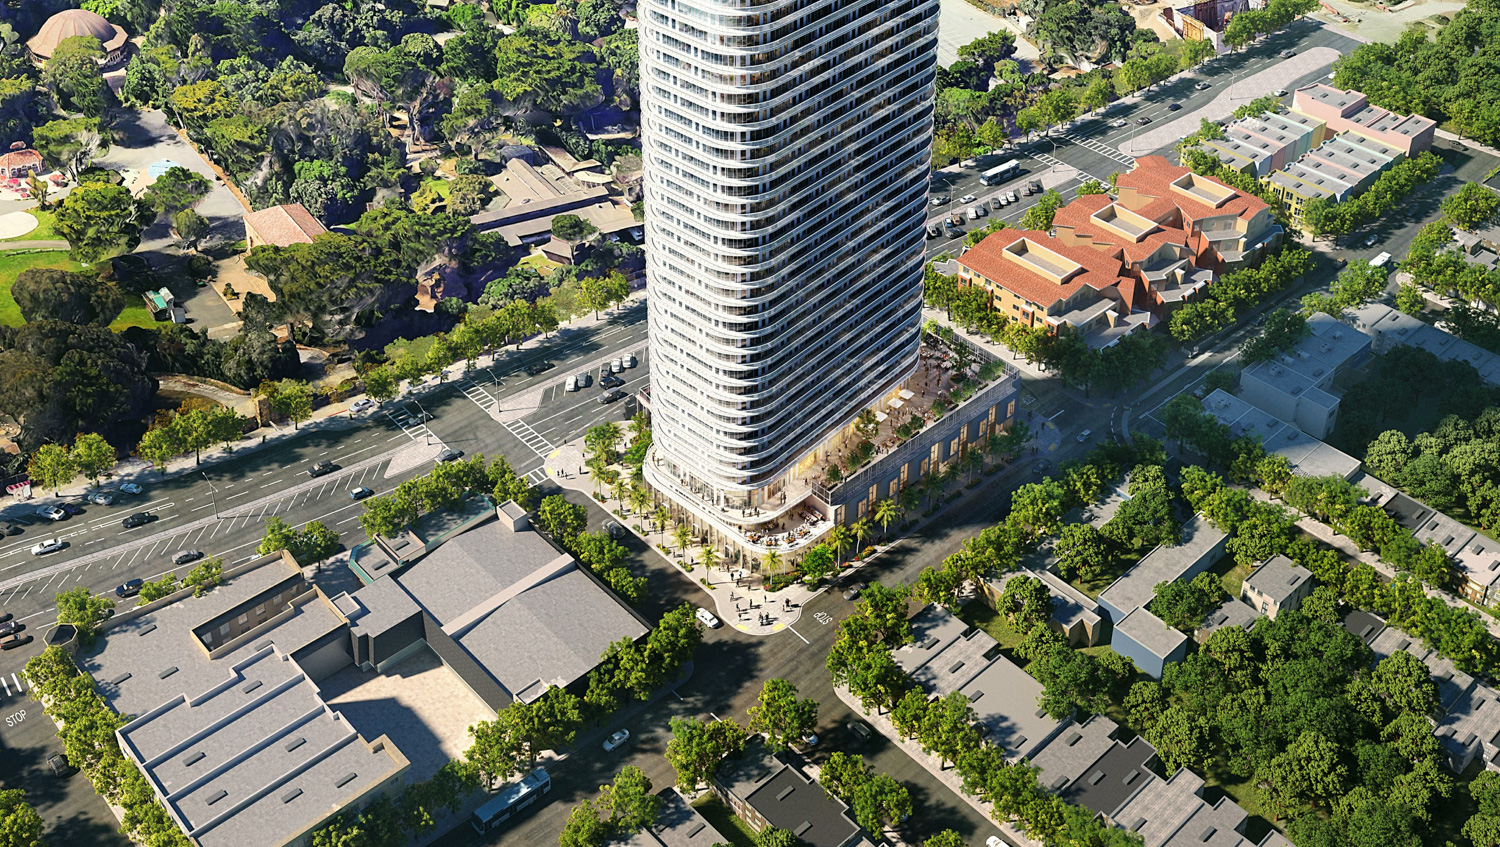 2700 Sloat Boulevard aerial podium overview, rendering by Solomon Cordwell Buenz